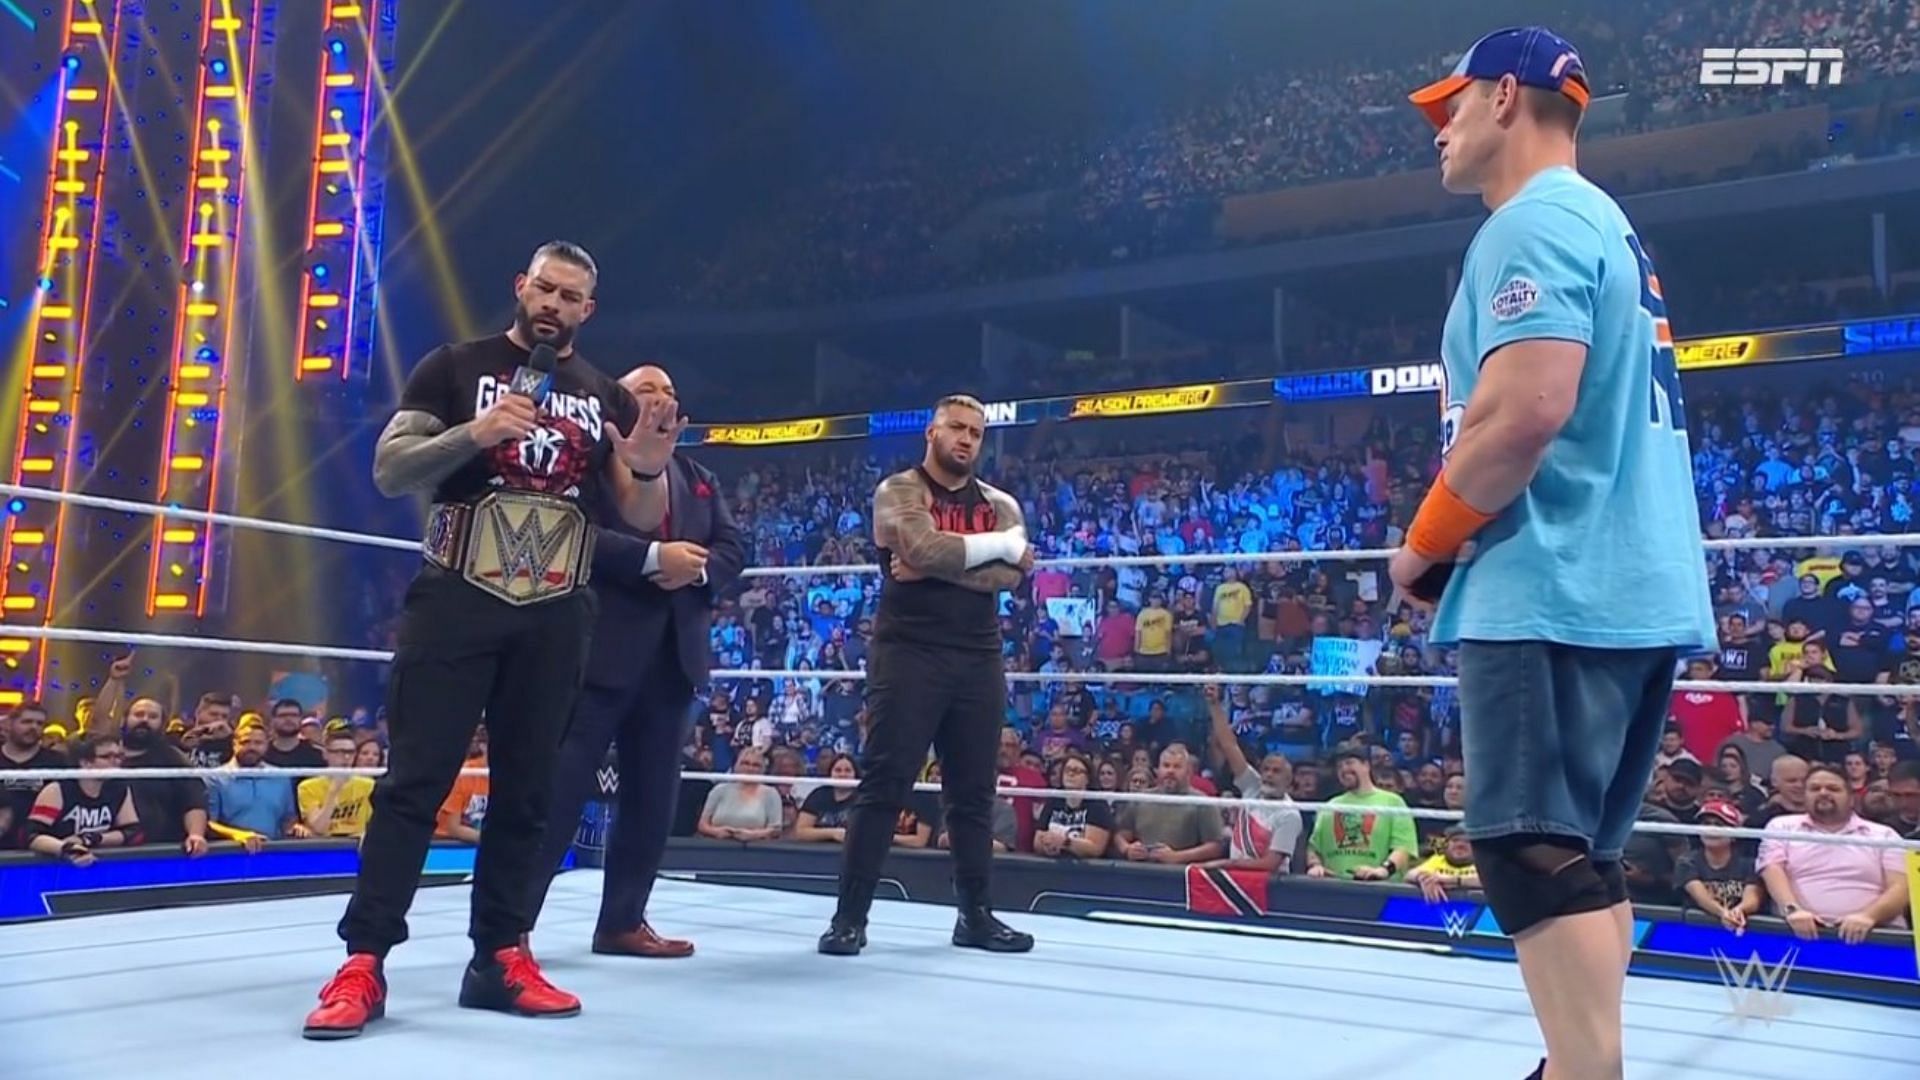 John Cena and Roman Reigns had a face-off on WWE SmackDown.